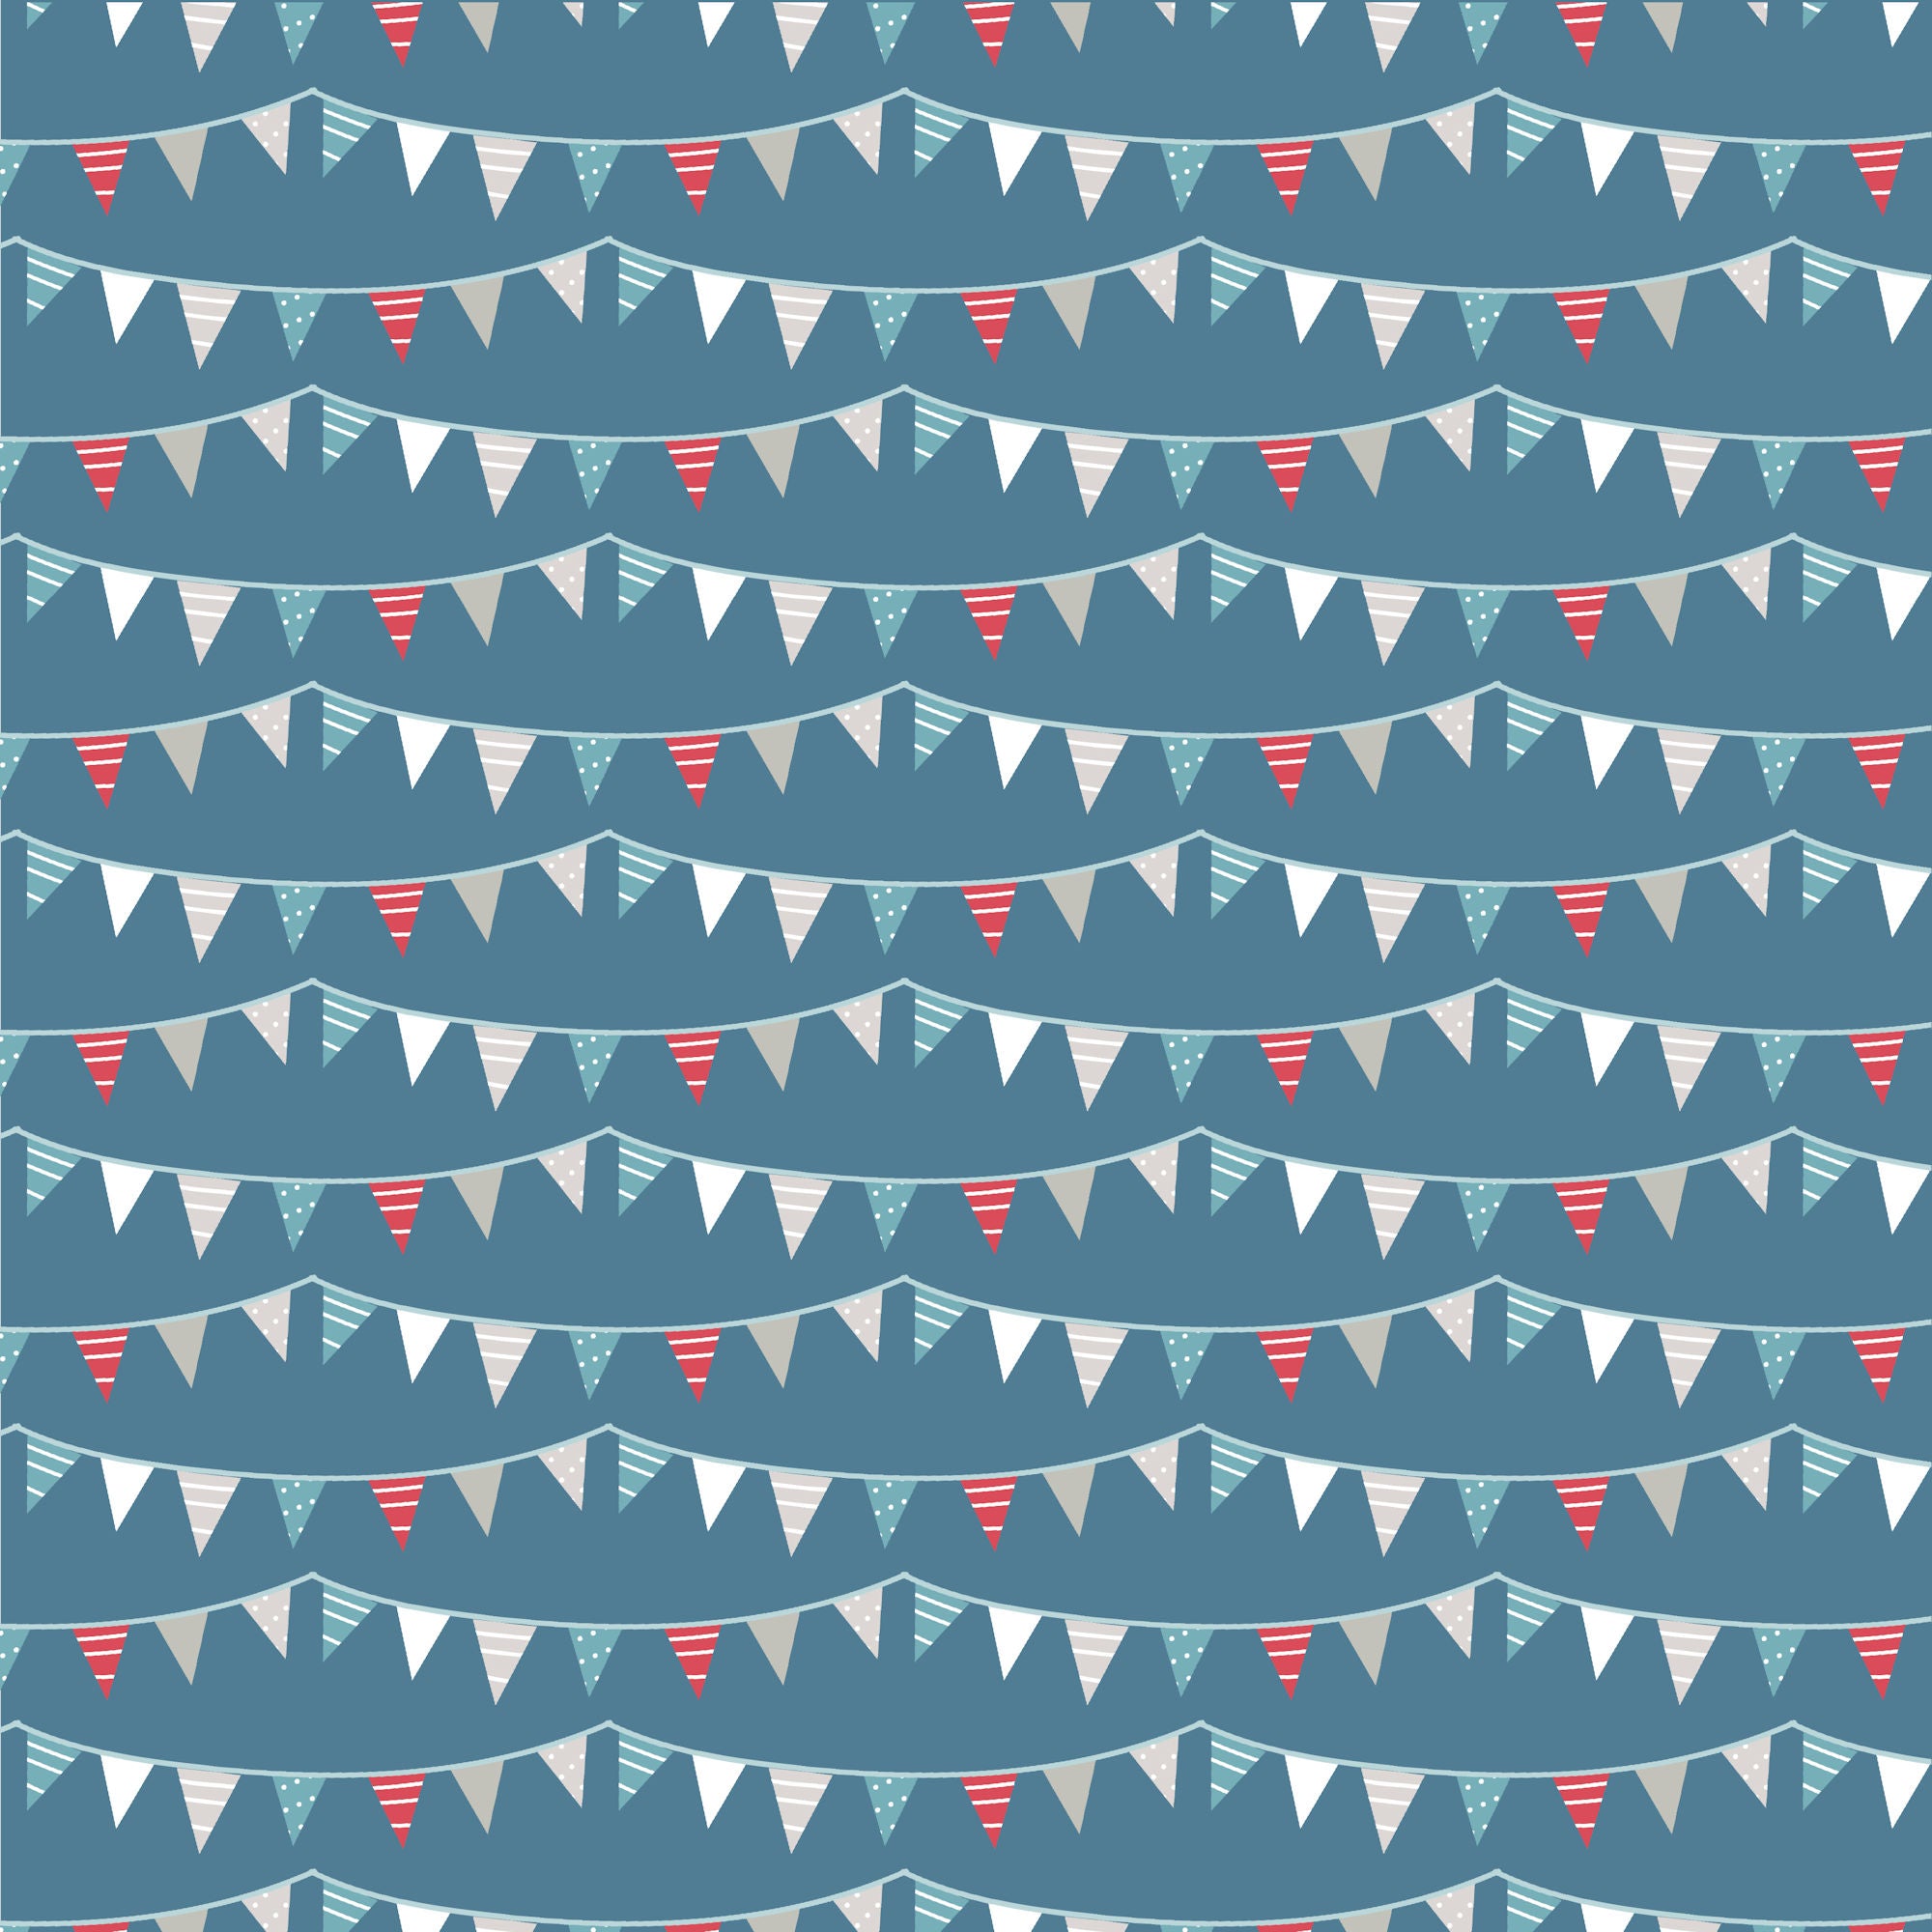 By The Sea Collection Flying Flags 12 x 12 Double-Sided Scrapbook Paper by SSC Designs